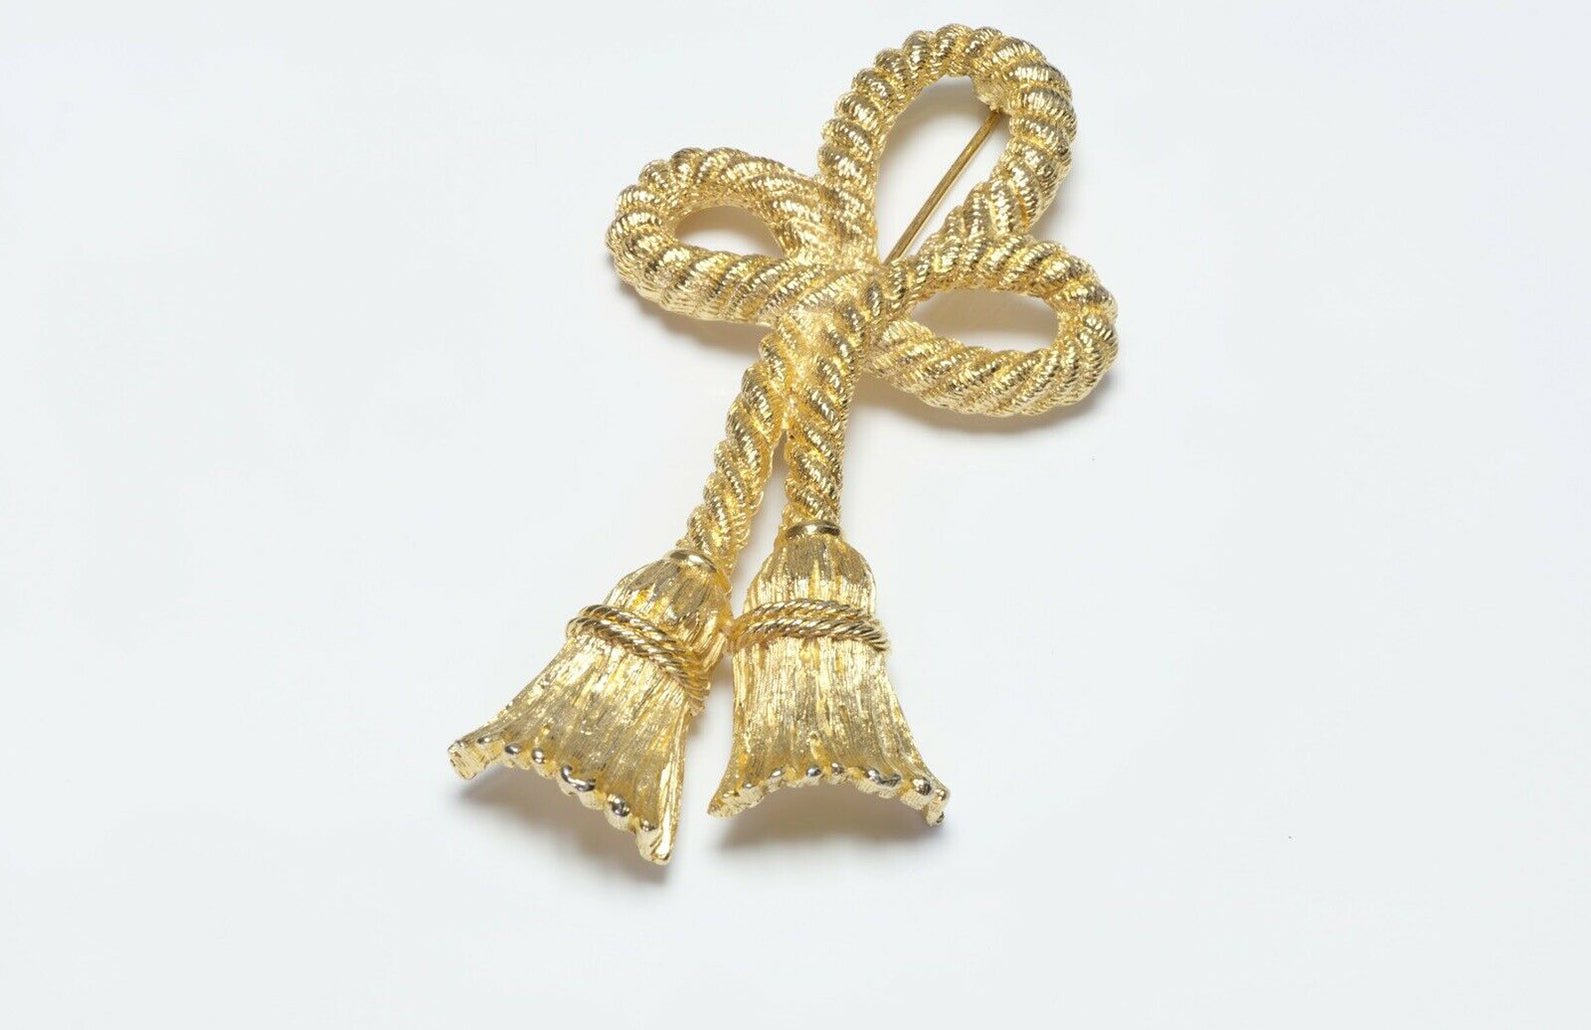 GIVENCHY Paris Twist Rope Bow Brooch